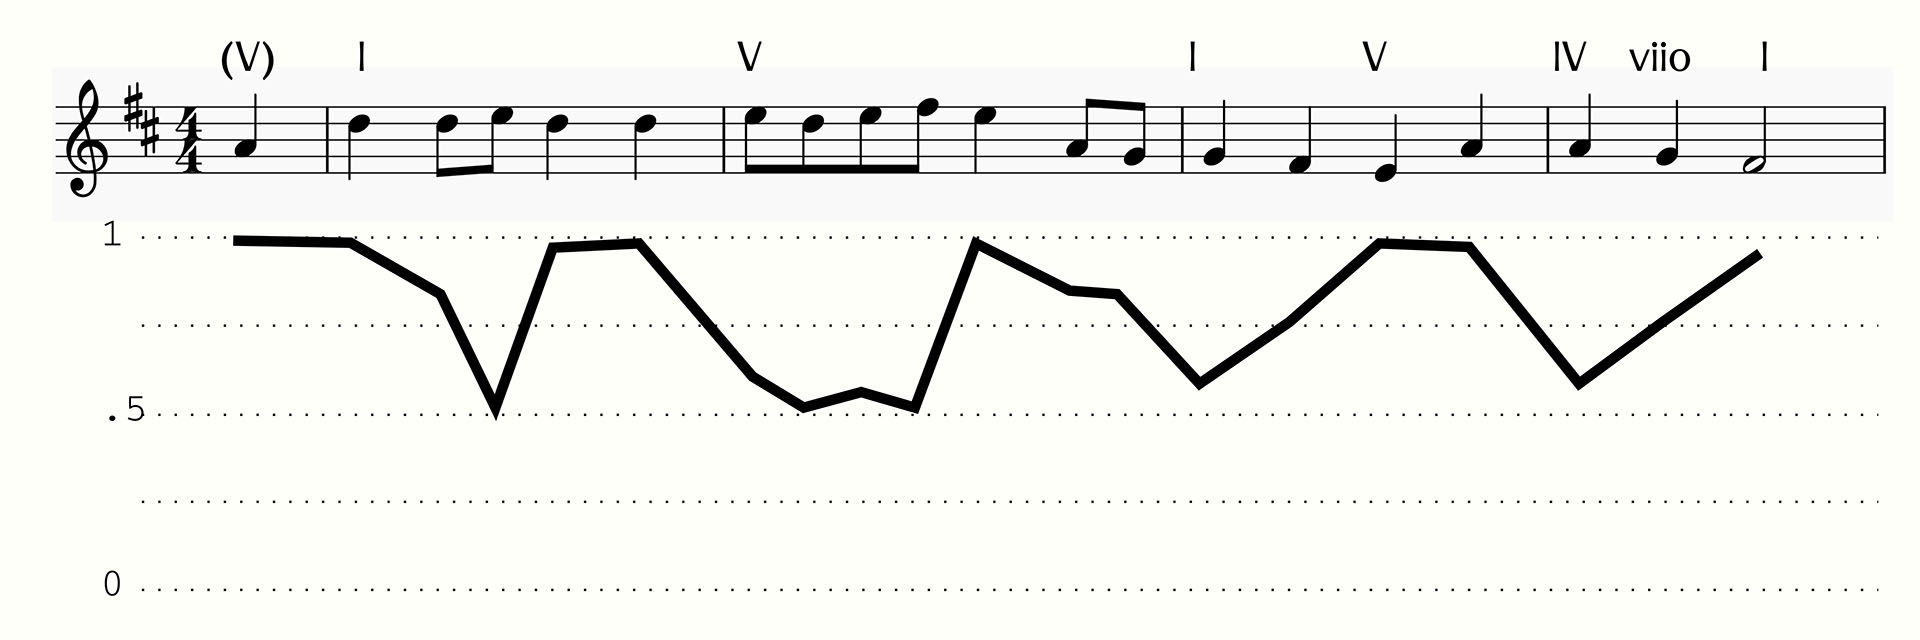 An image of musical notation with a line graph below it.